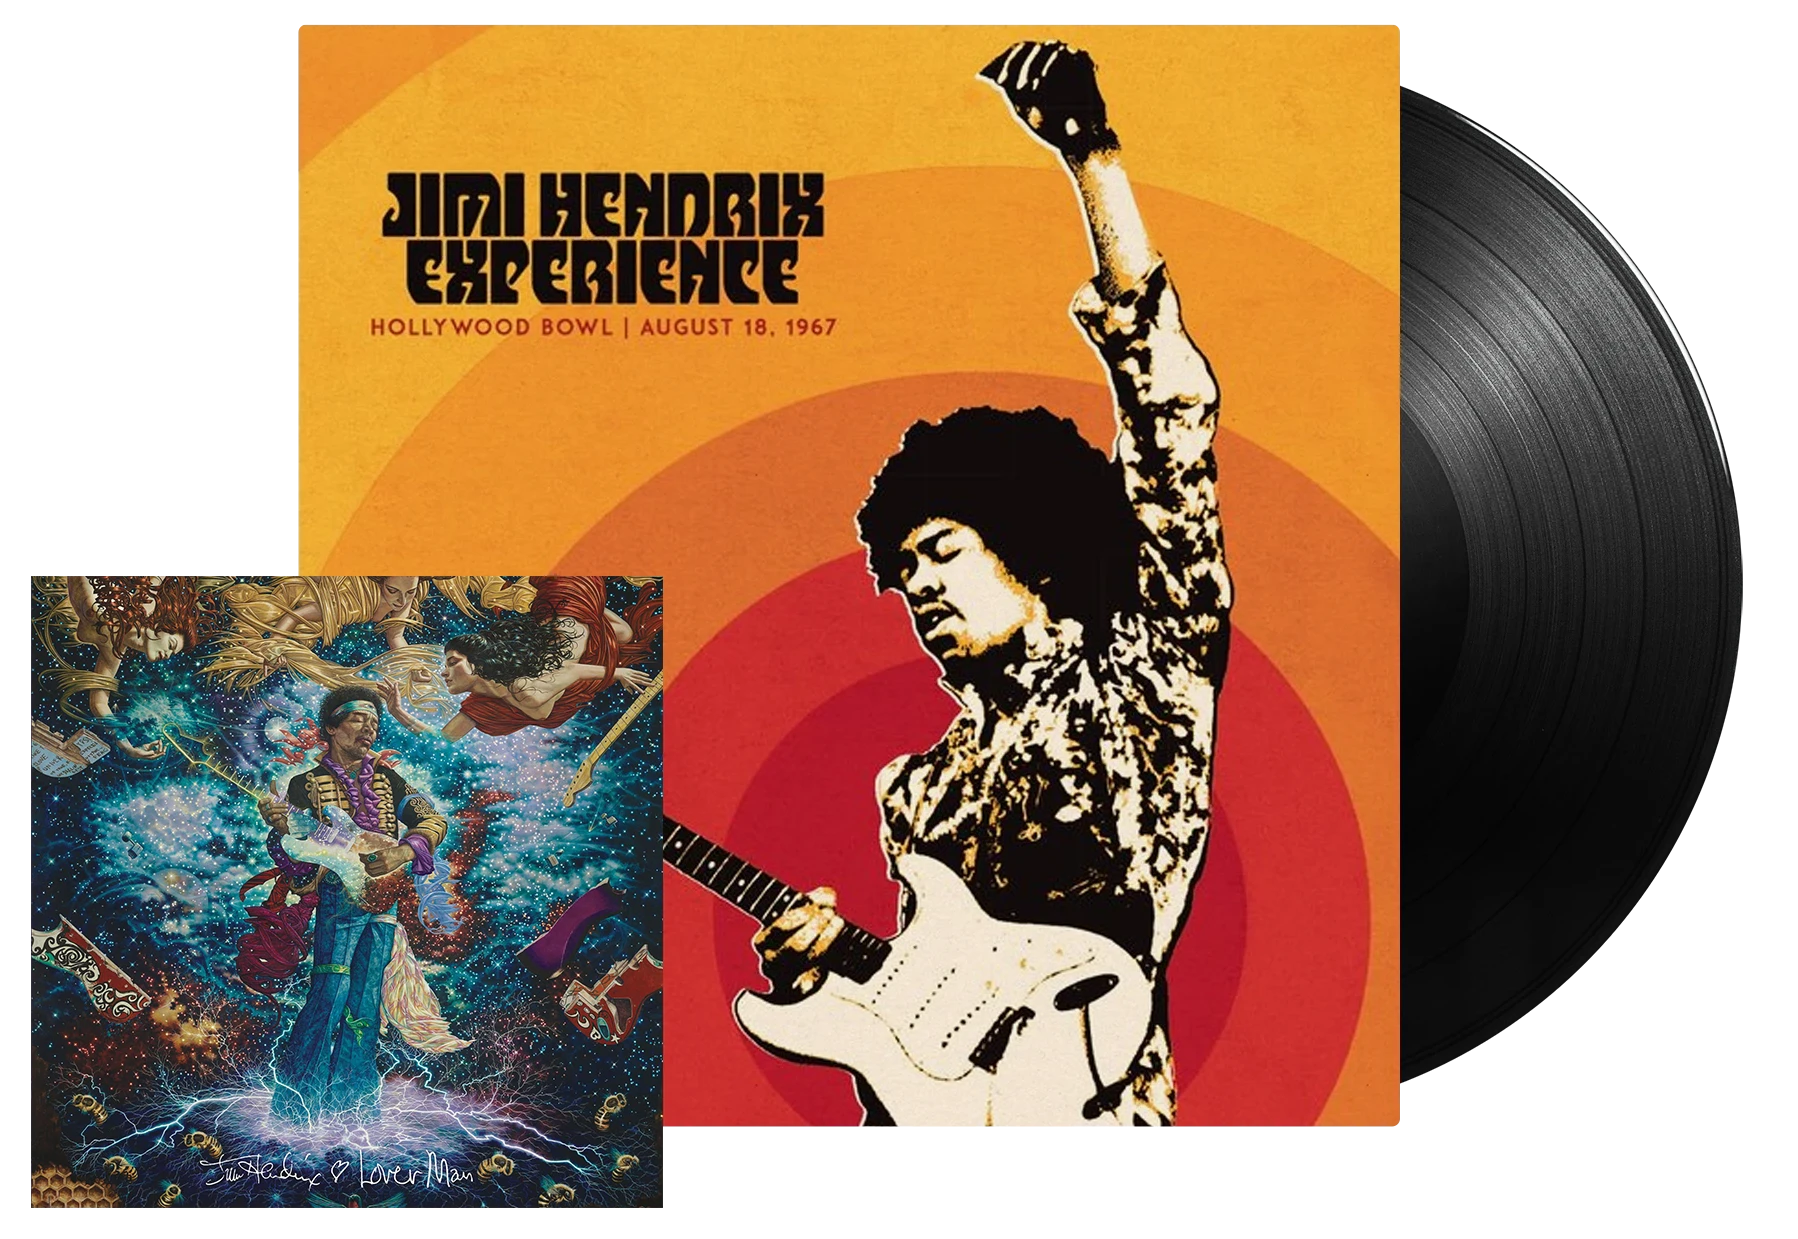 Jimi Hendrix Experience - Hollywood Bowl August 18, 1967 (inclusief exclusieve Jimi Hendrix 7-inch)